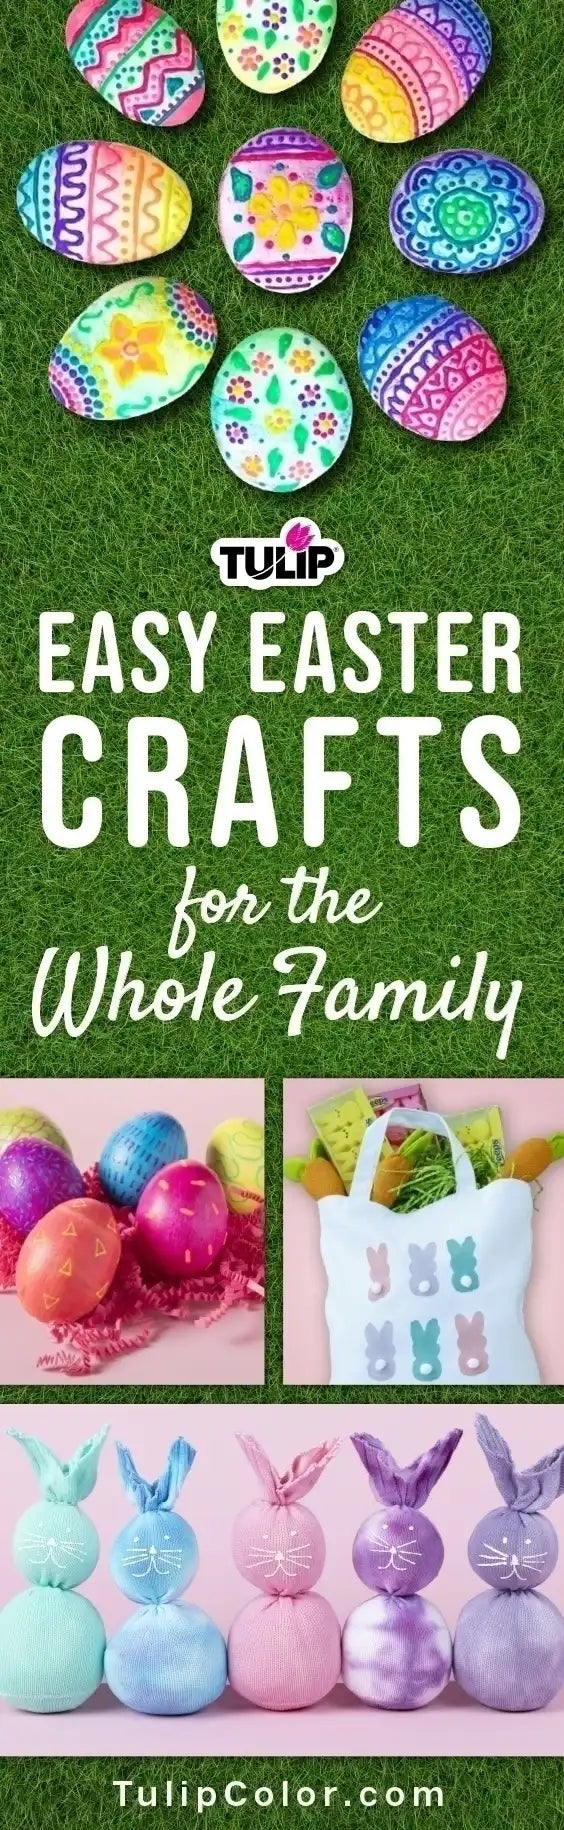 4 Easy Easter Projects for All Ages